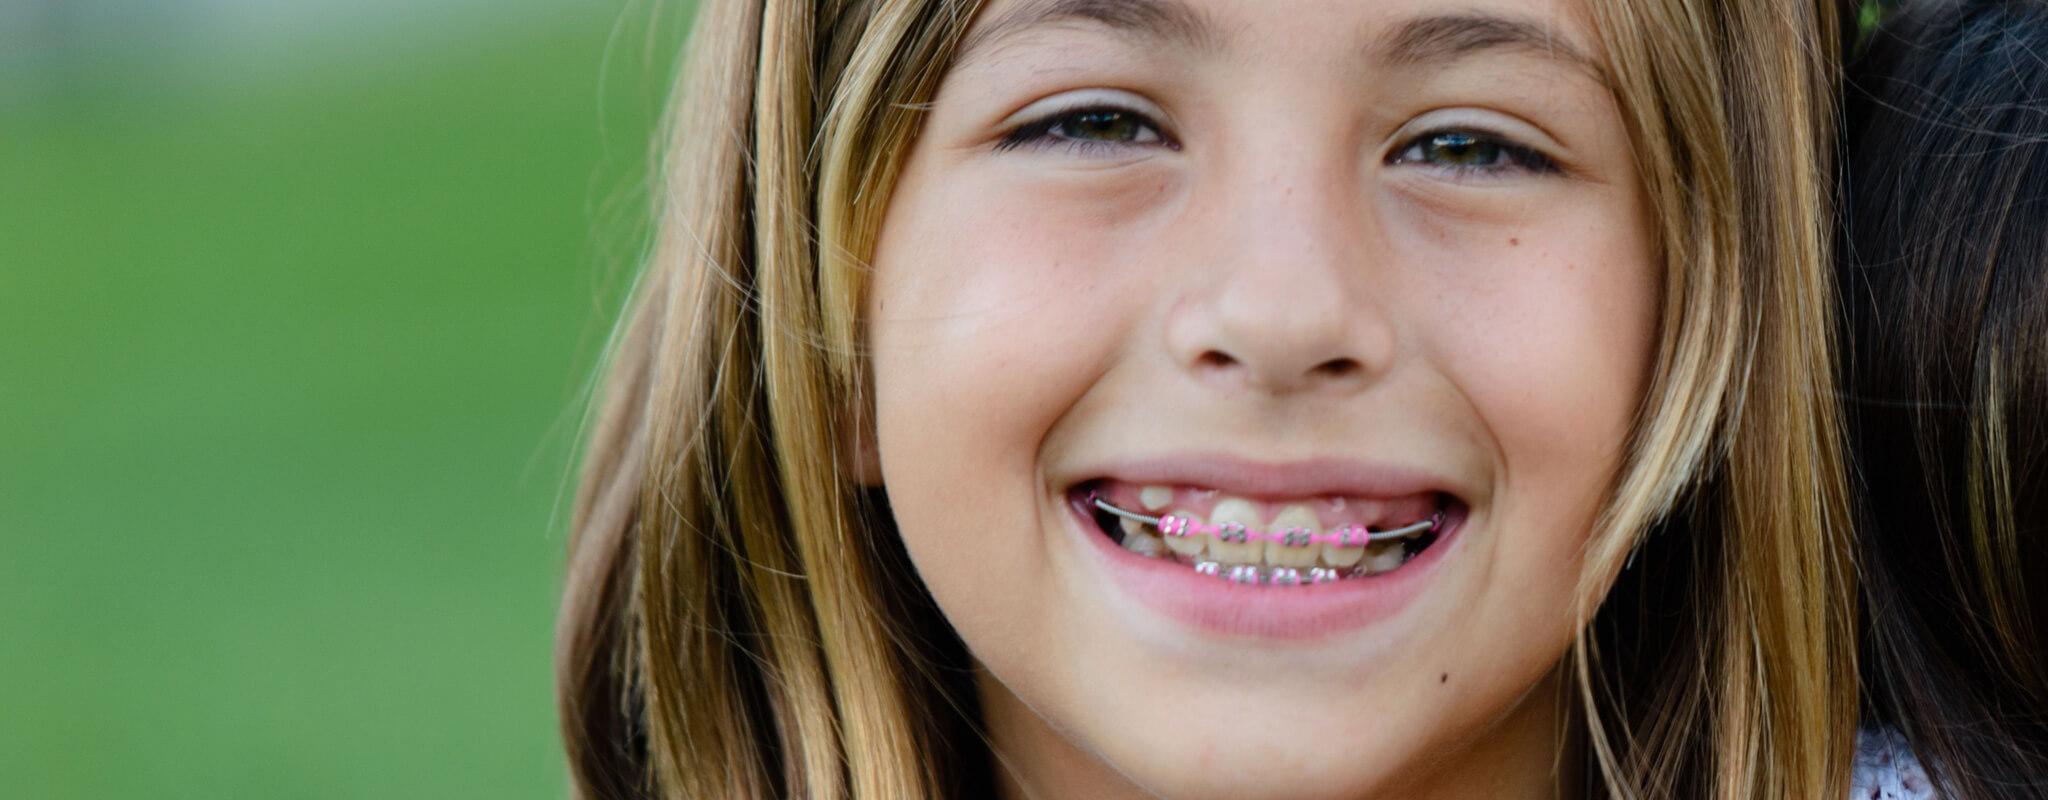 girl smiles after hearing you can get braces with missing teeth